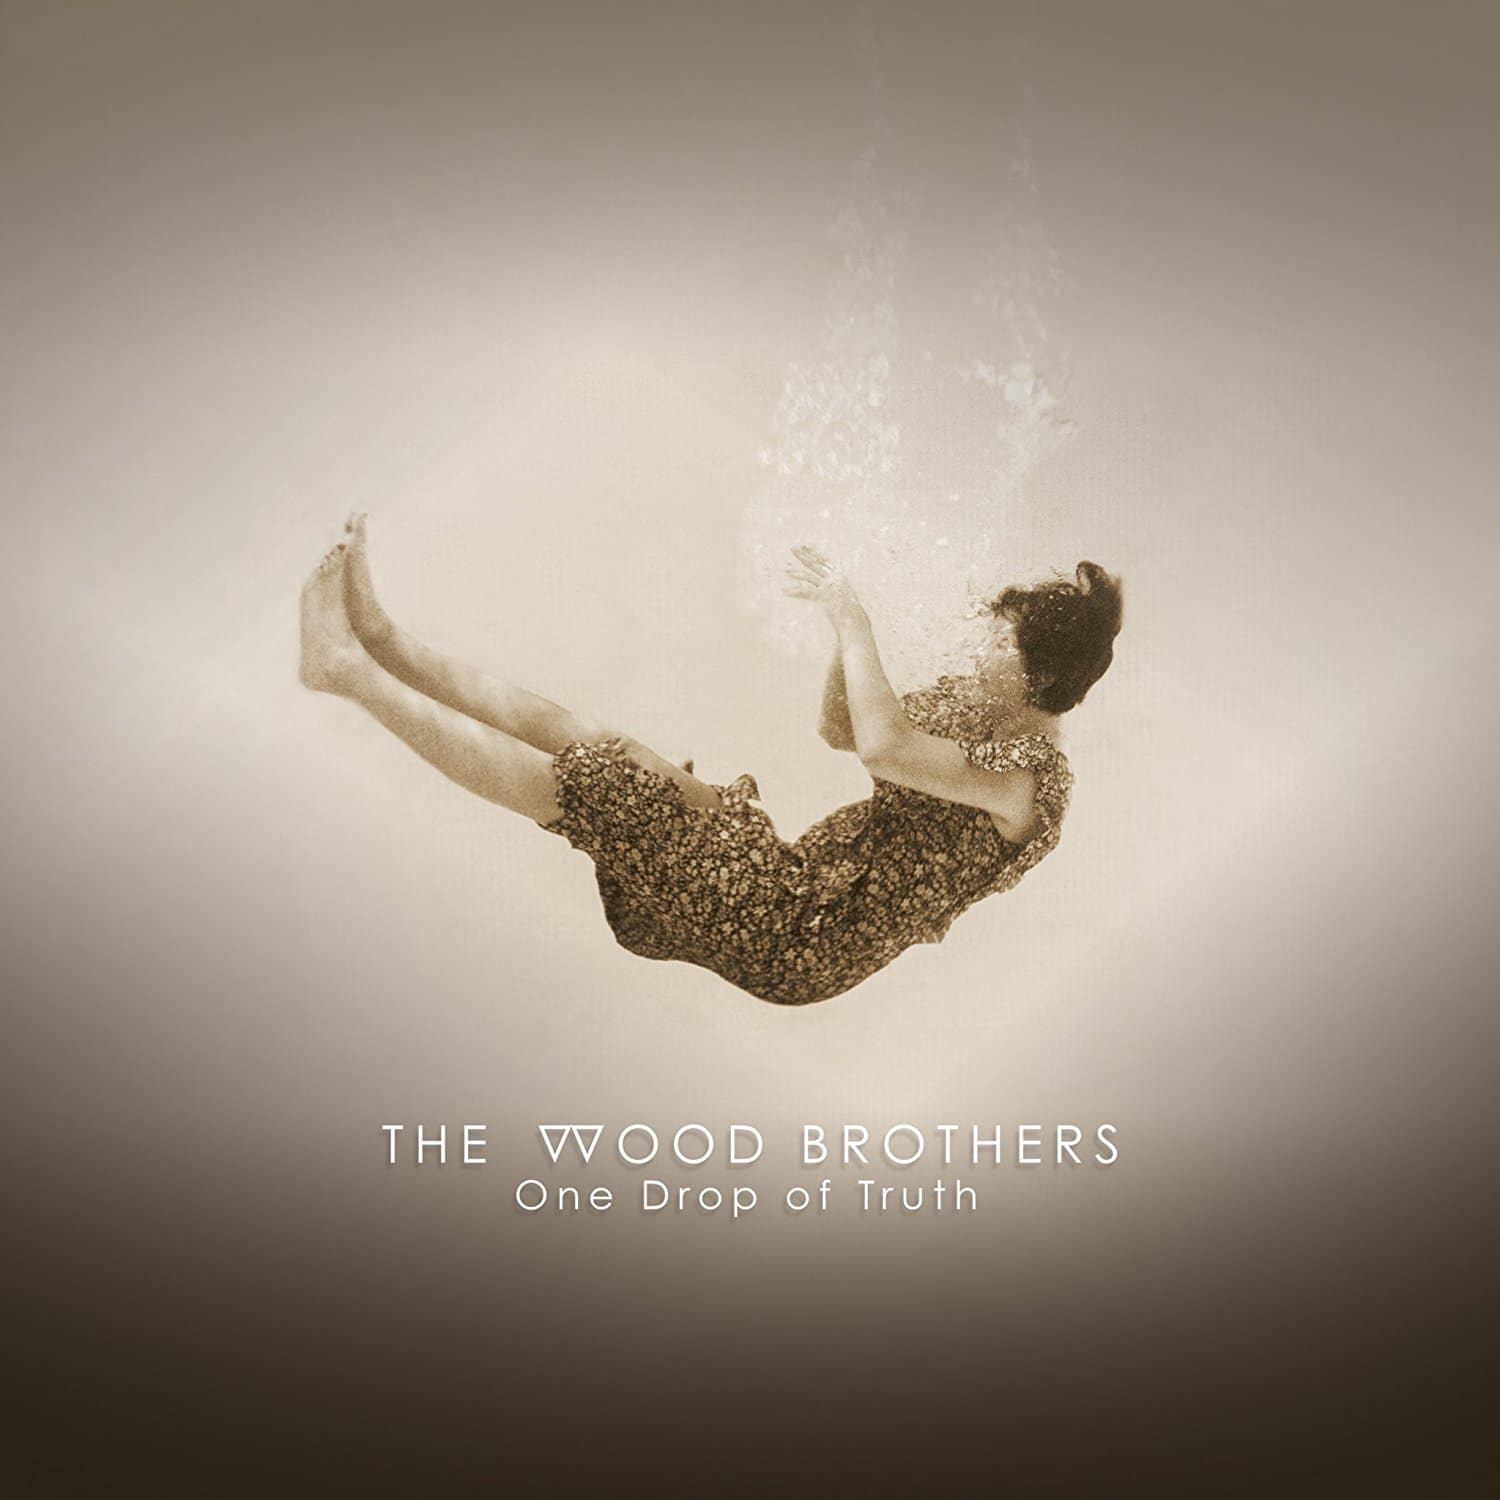 The Wood Brothers: One Drop of Truth